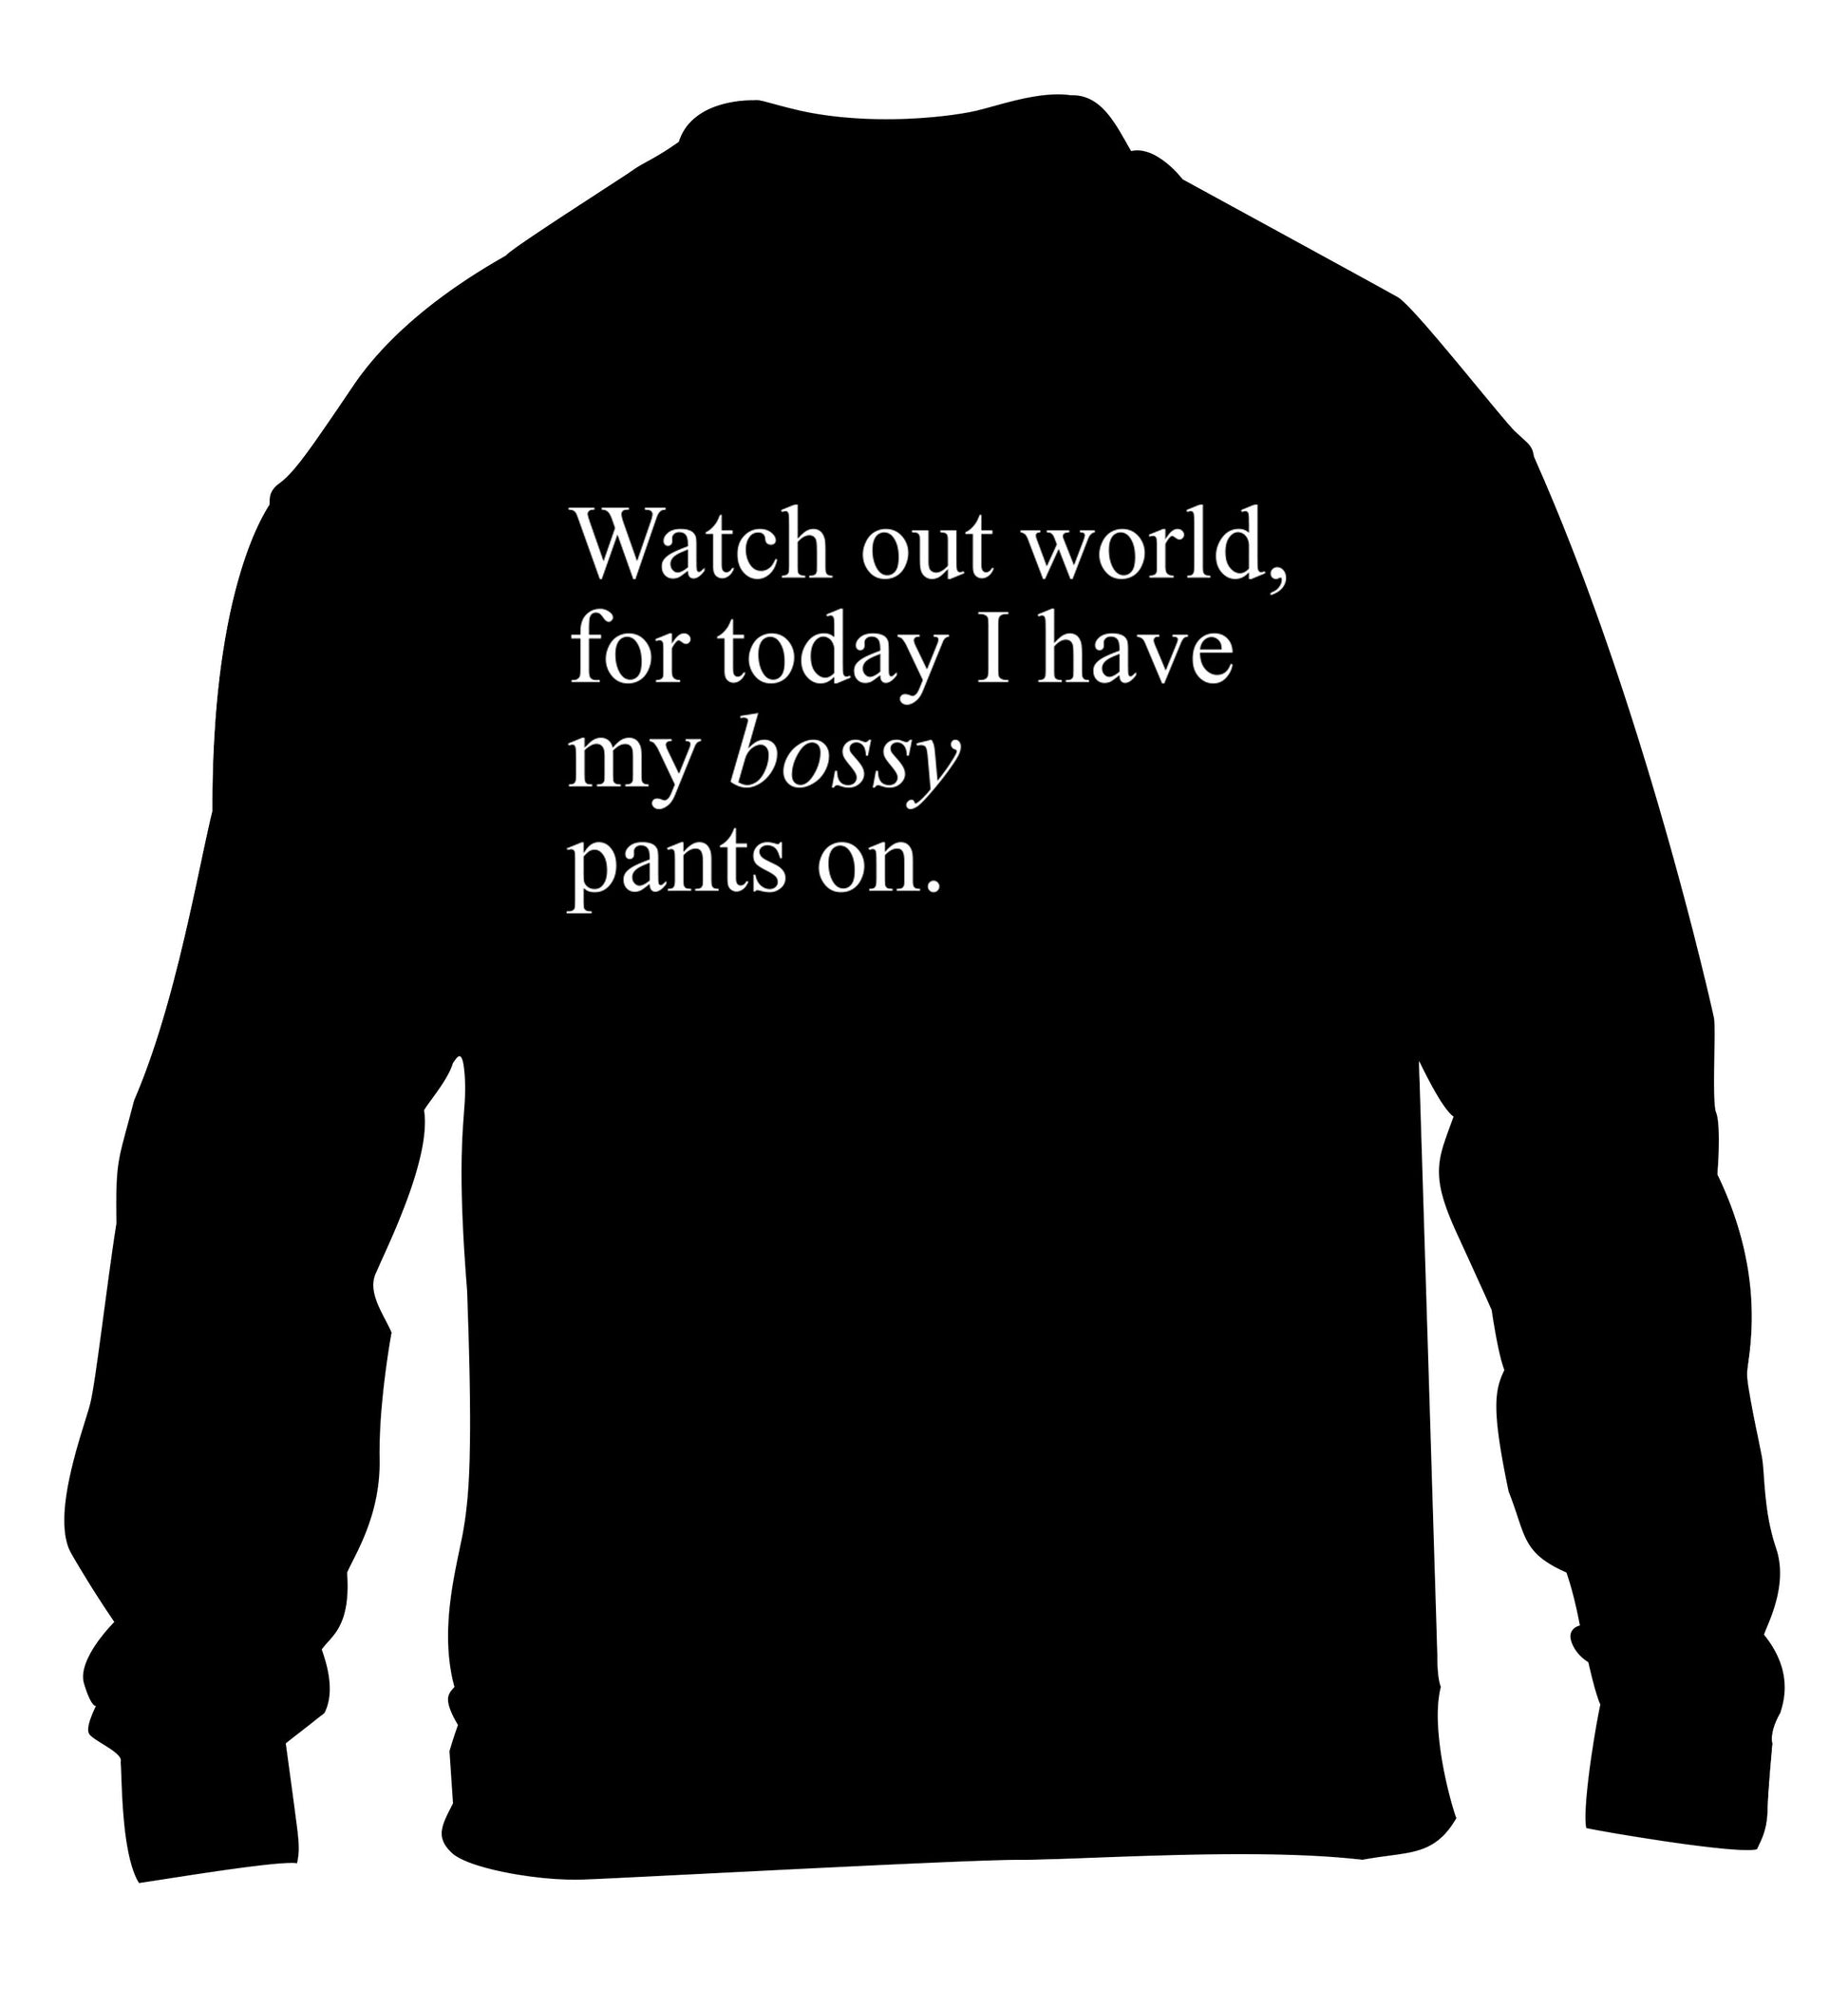 Watch out world, for today I have my bossy pants on children's black sweater 12-14 Years